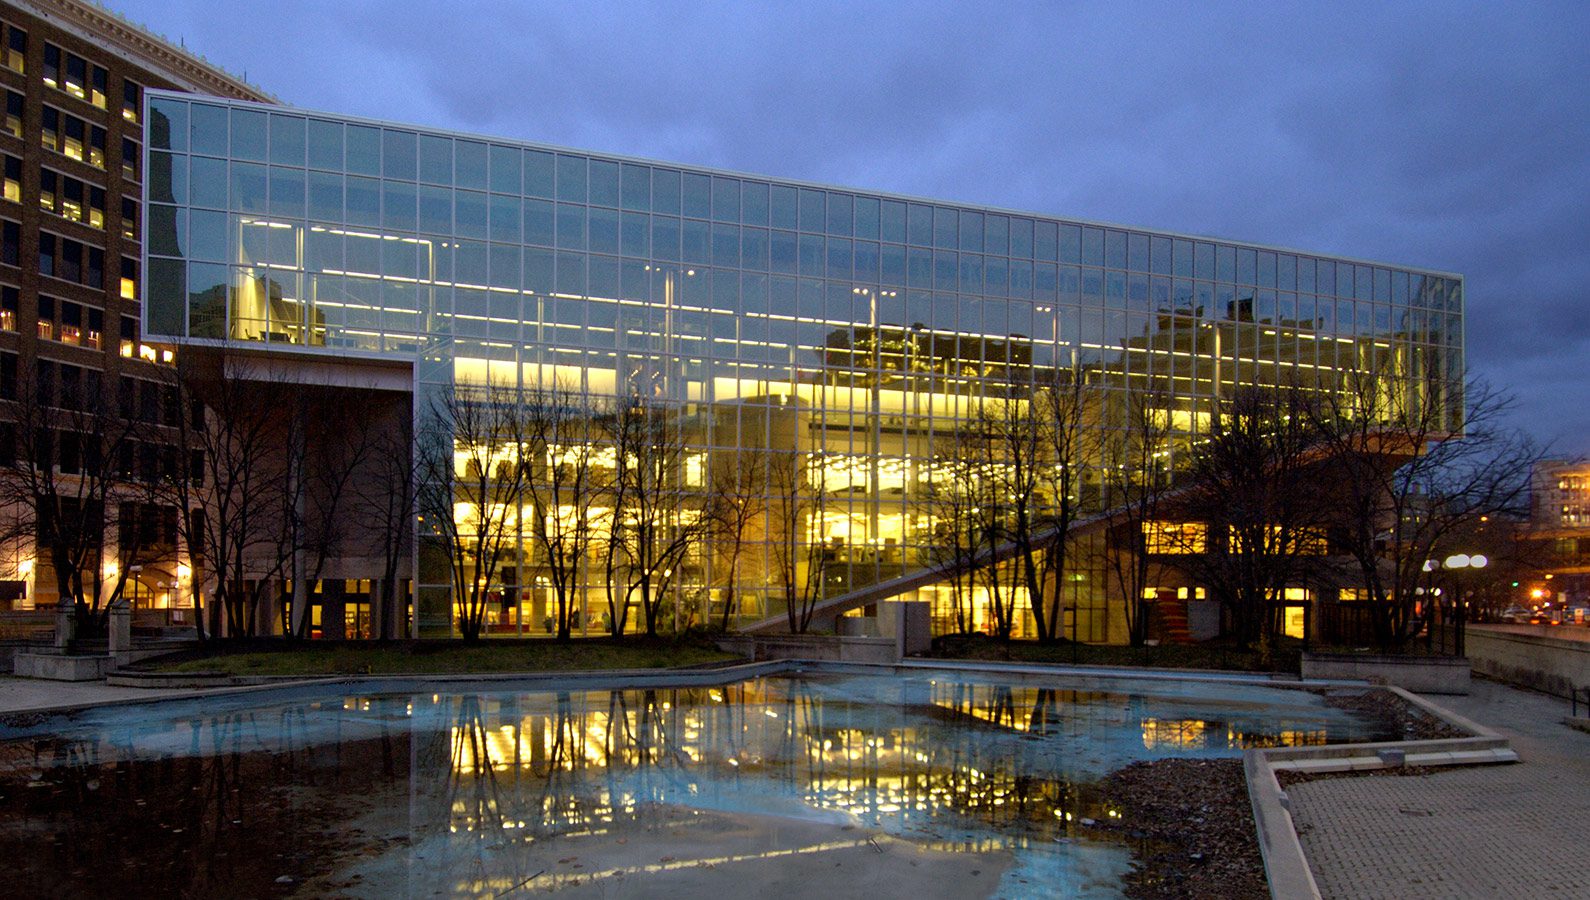 The exterior of Millennium Library looking into the facility.